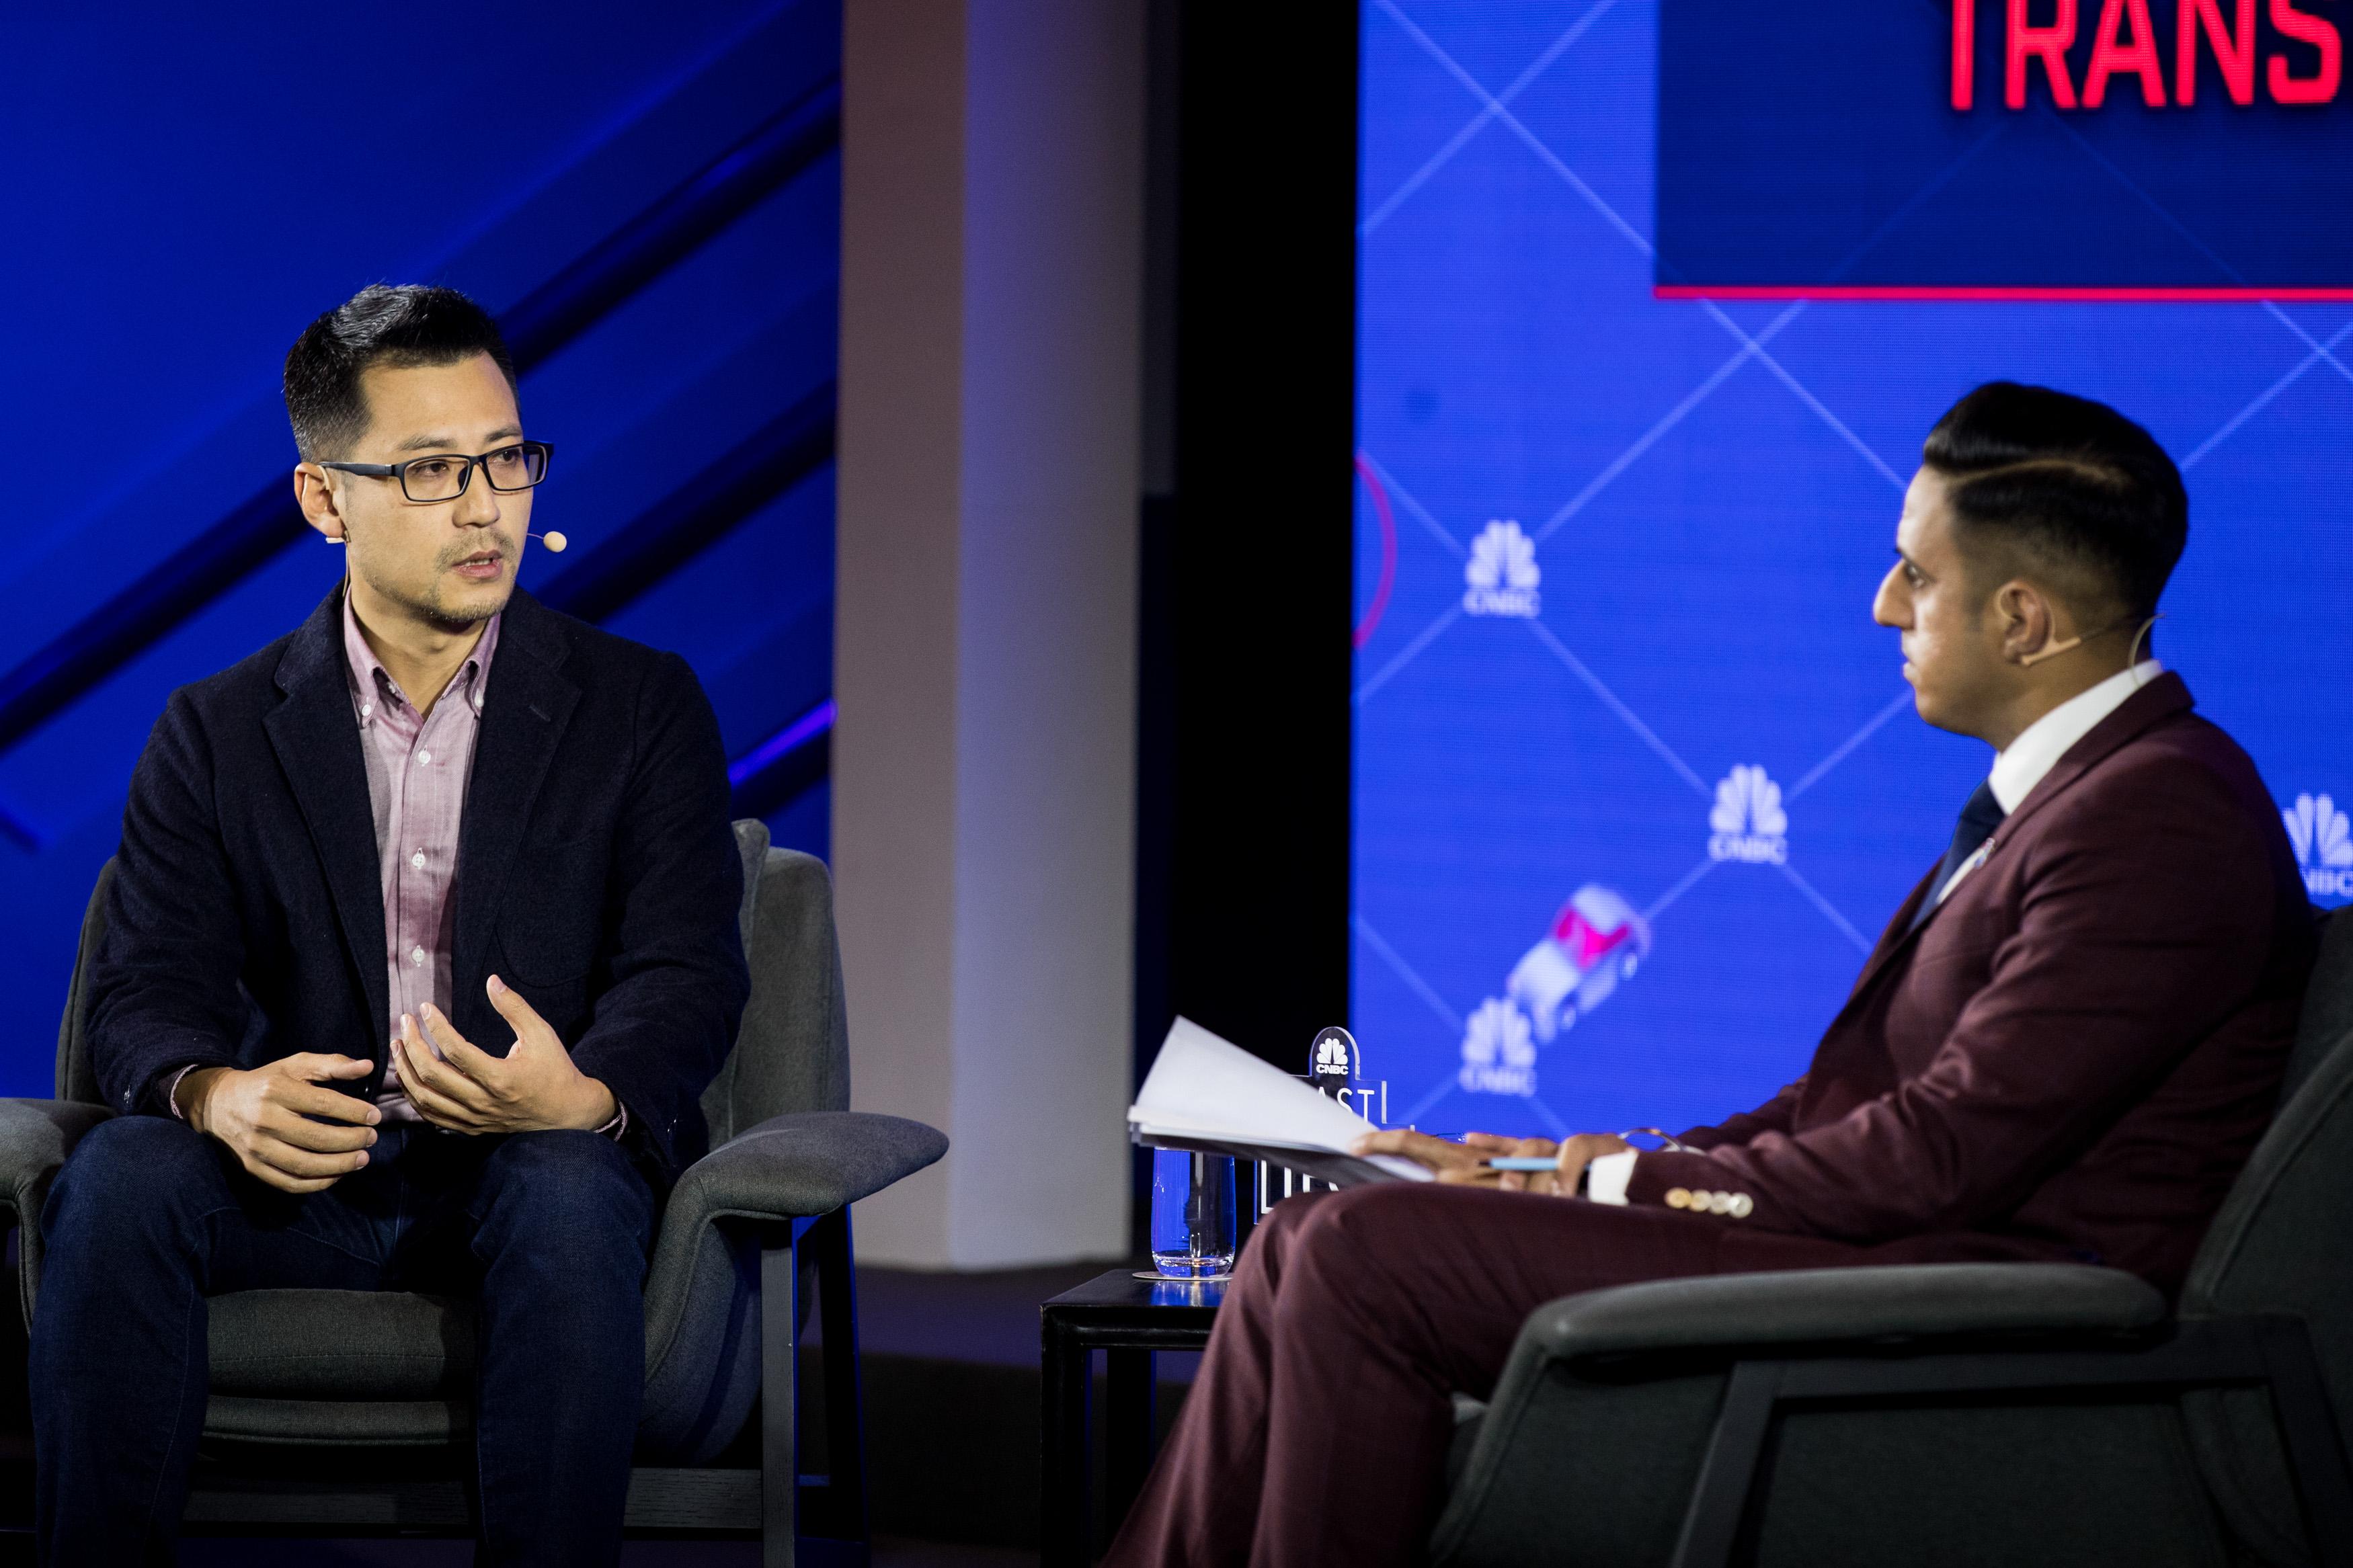 Tiger Qie, VP of DiDi Chuxing (left) and Arjun Kharpal, Technology Correspondent of CNBC (right)